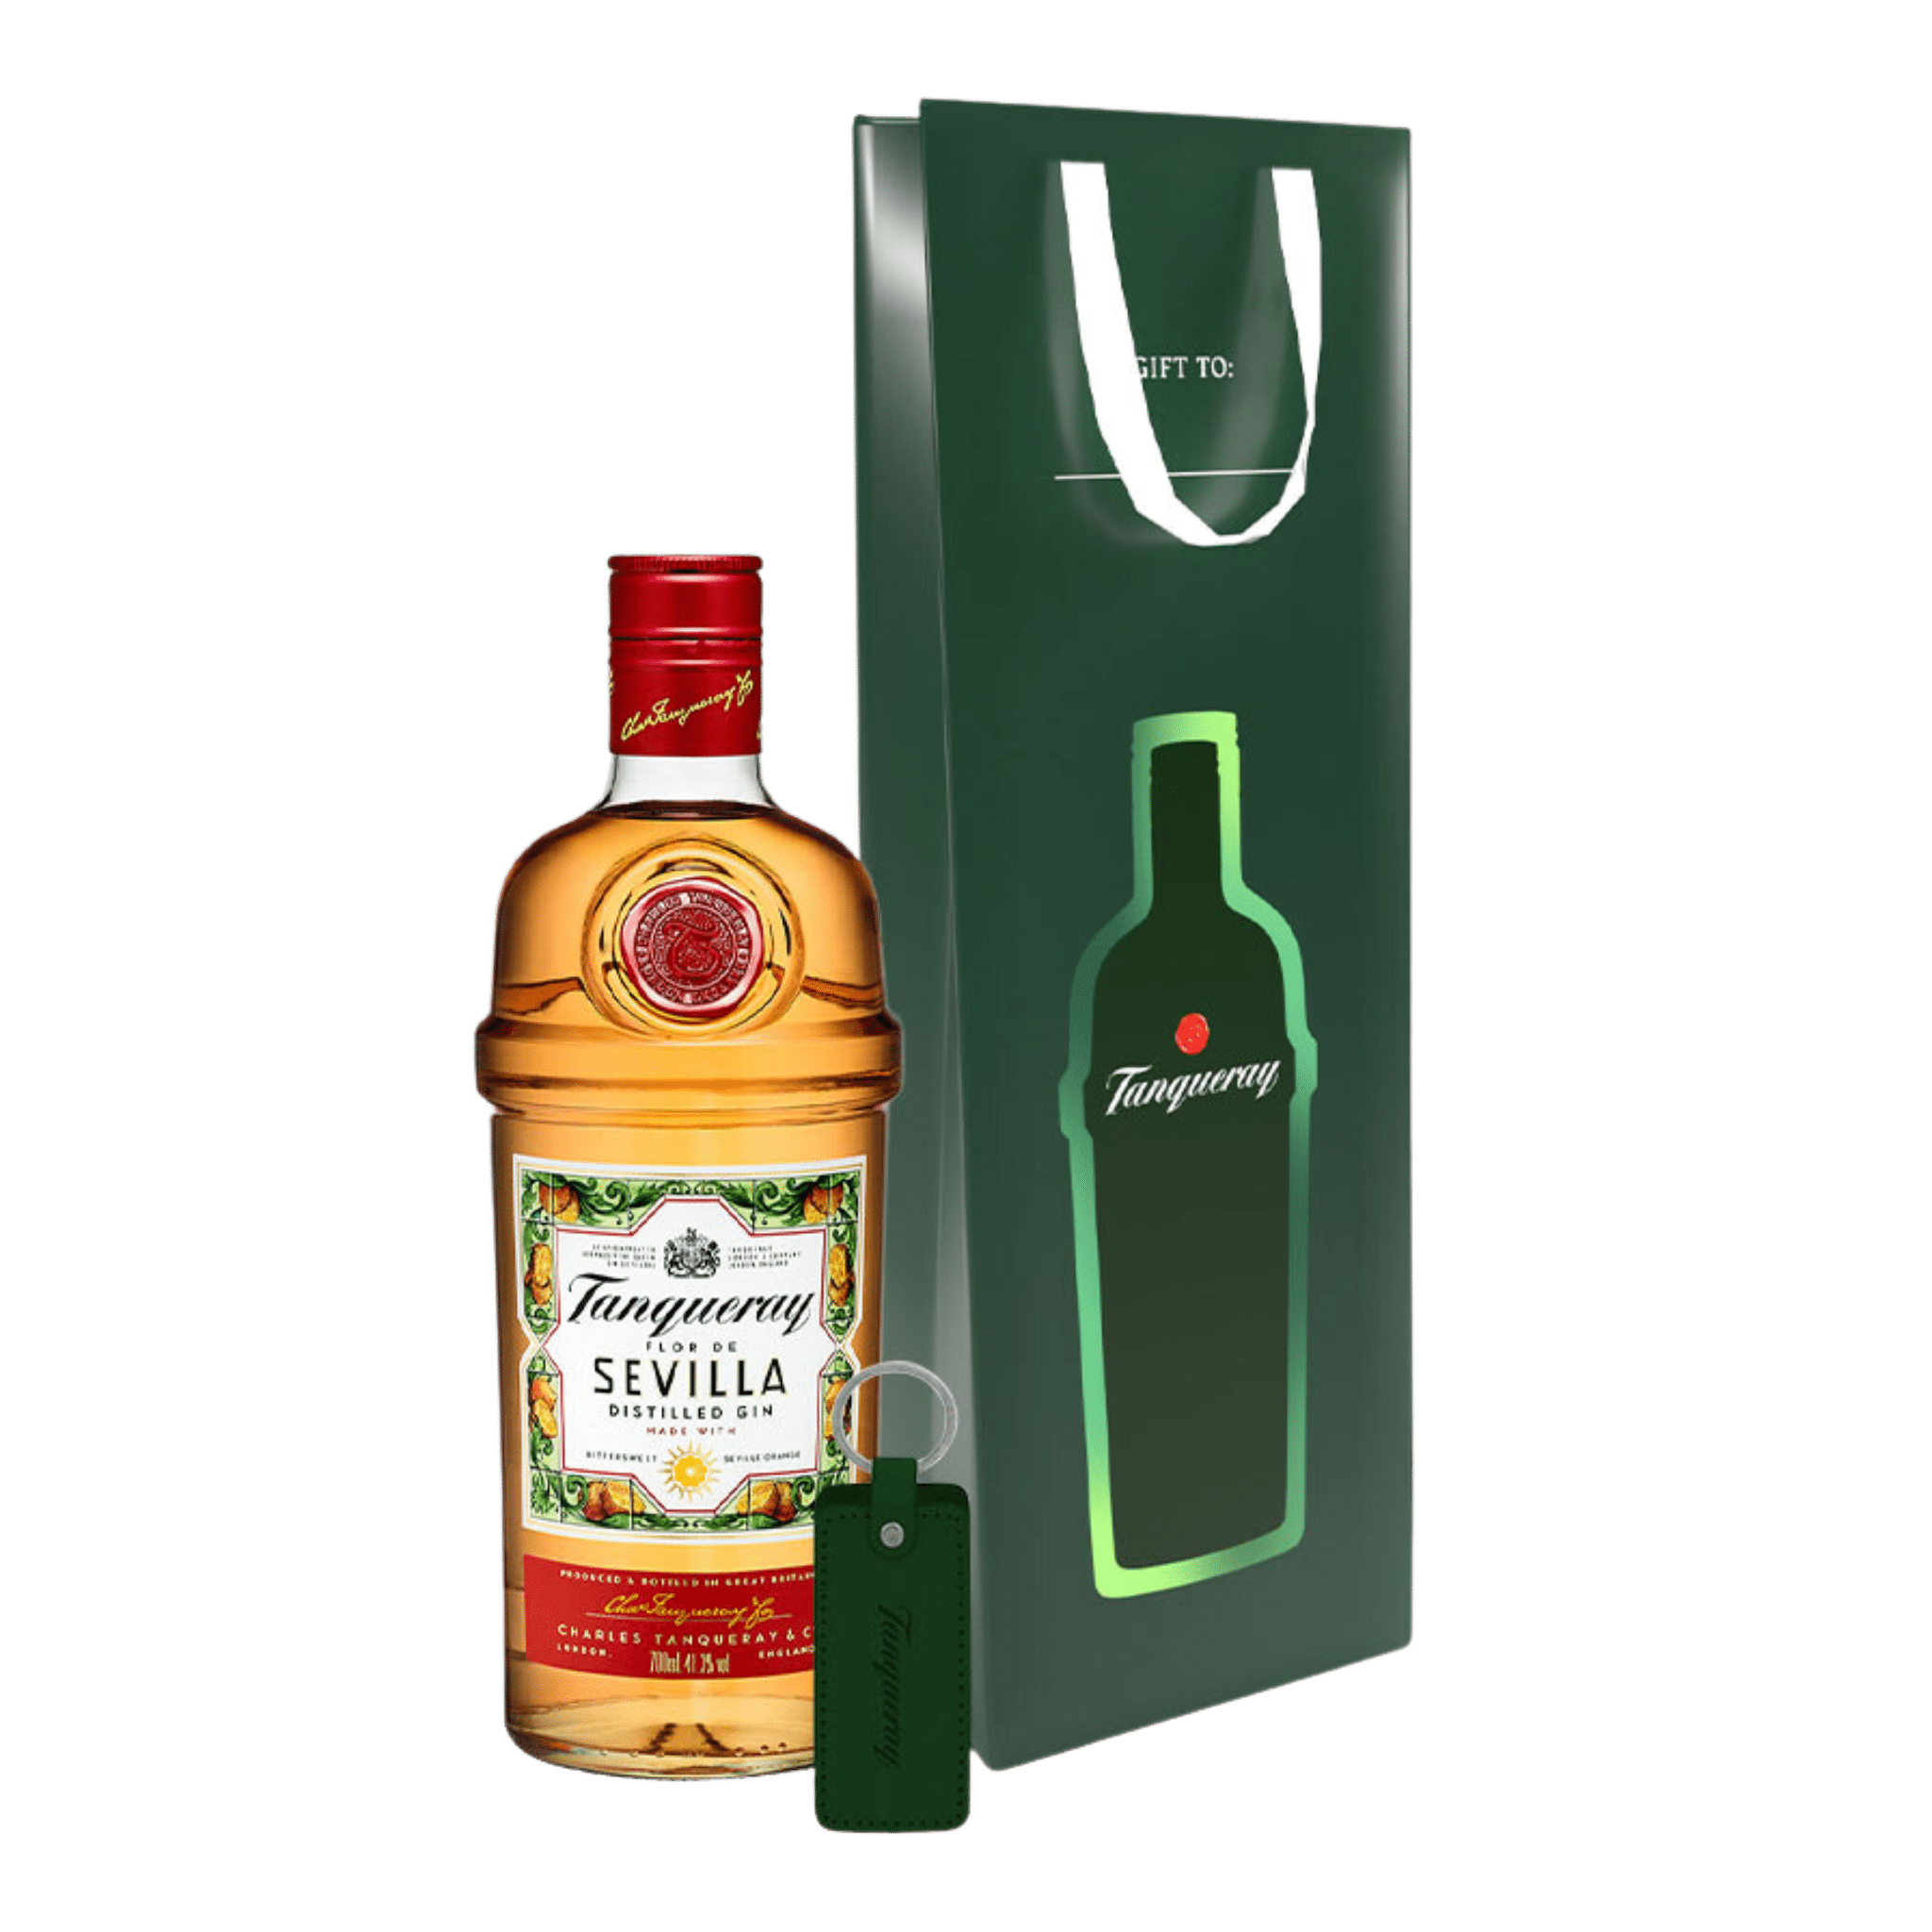 Tanqueray Sevilla 1L + Tanqueray Gift Bag with Keychain